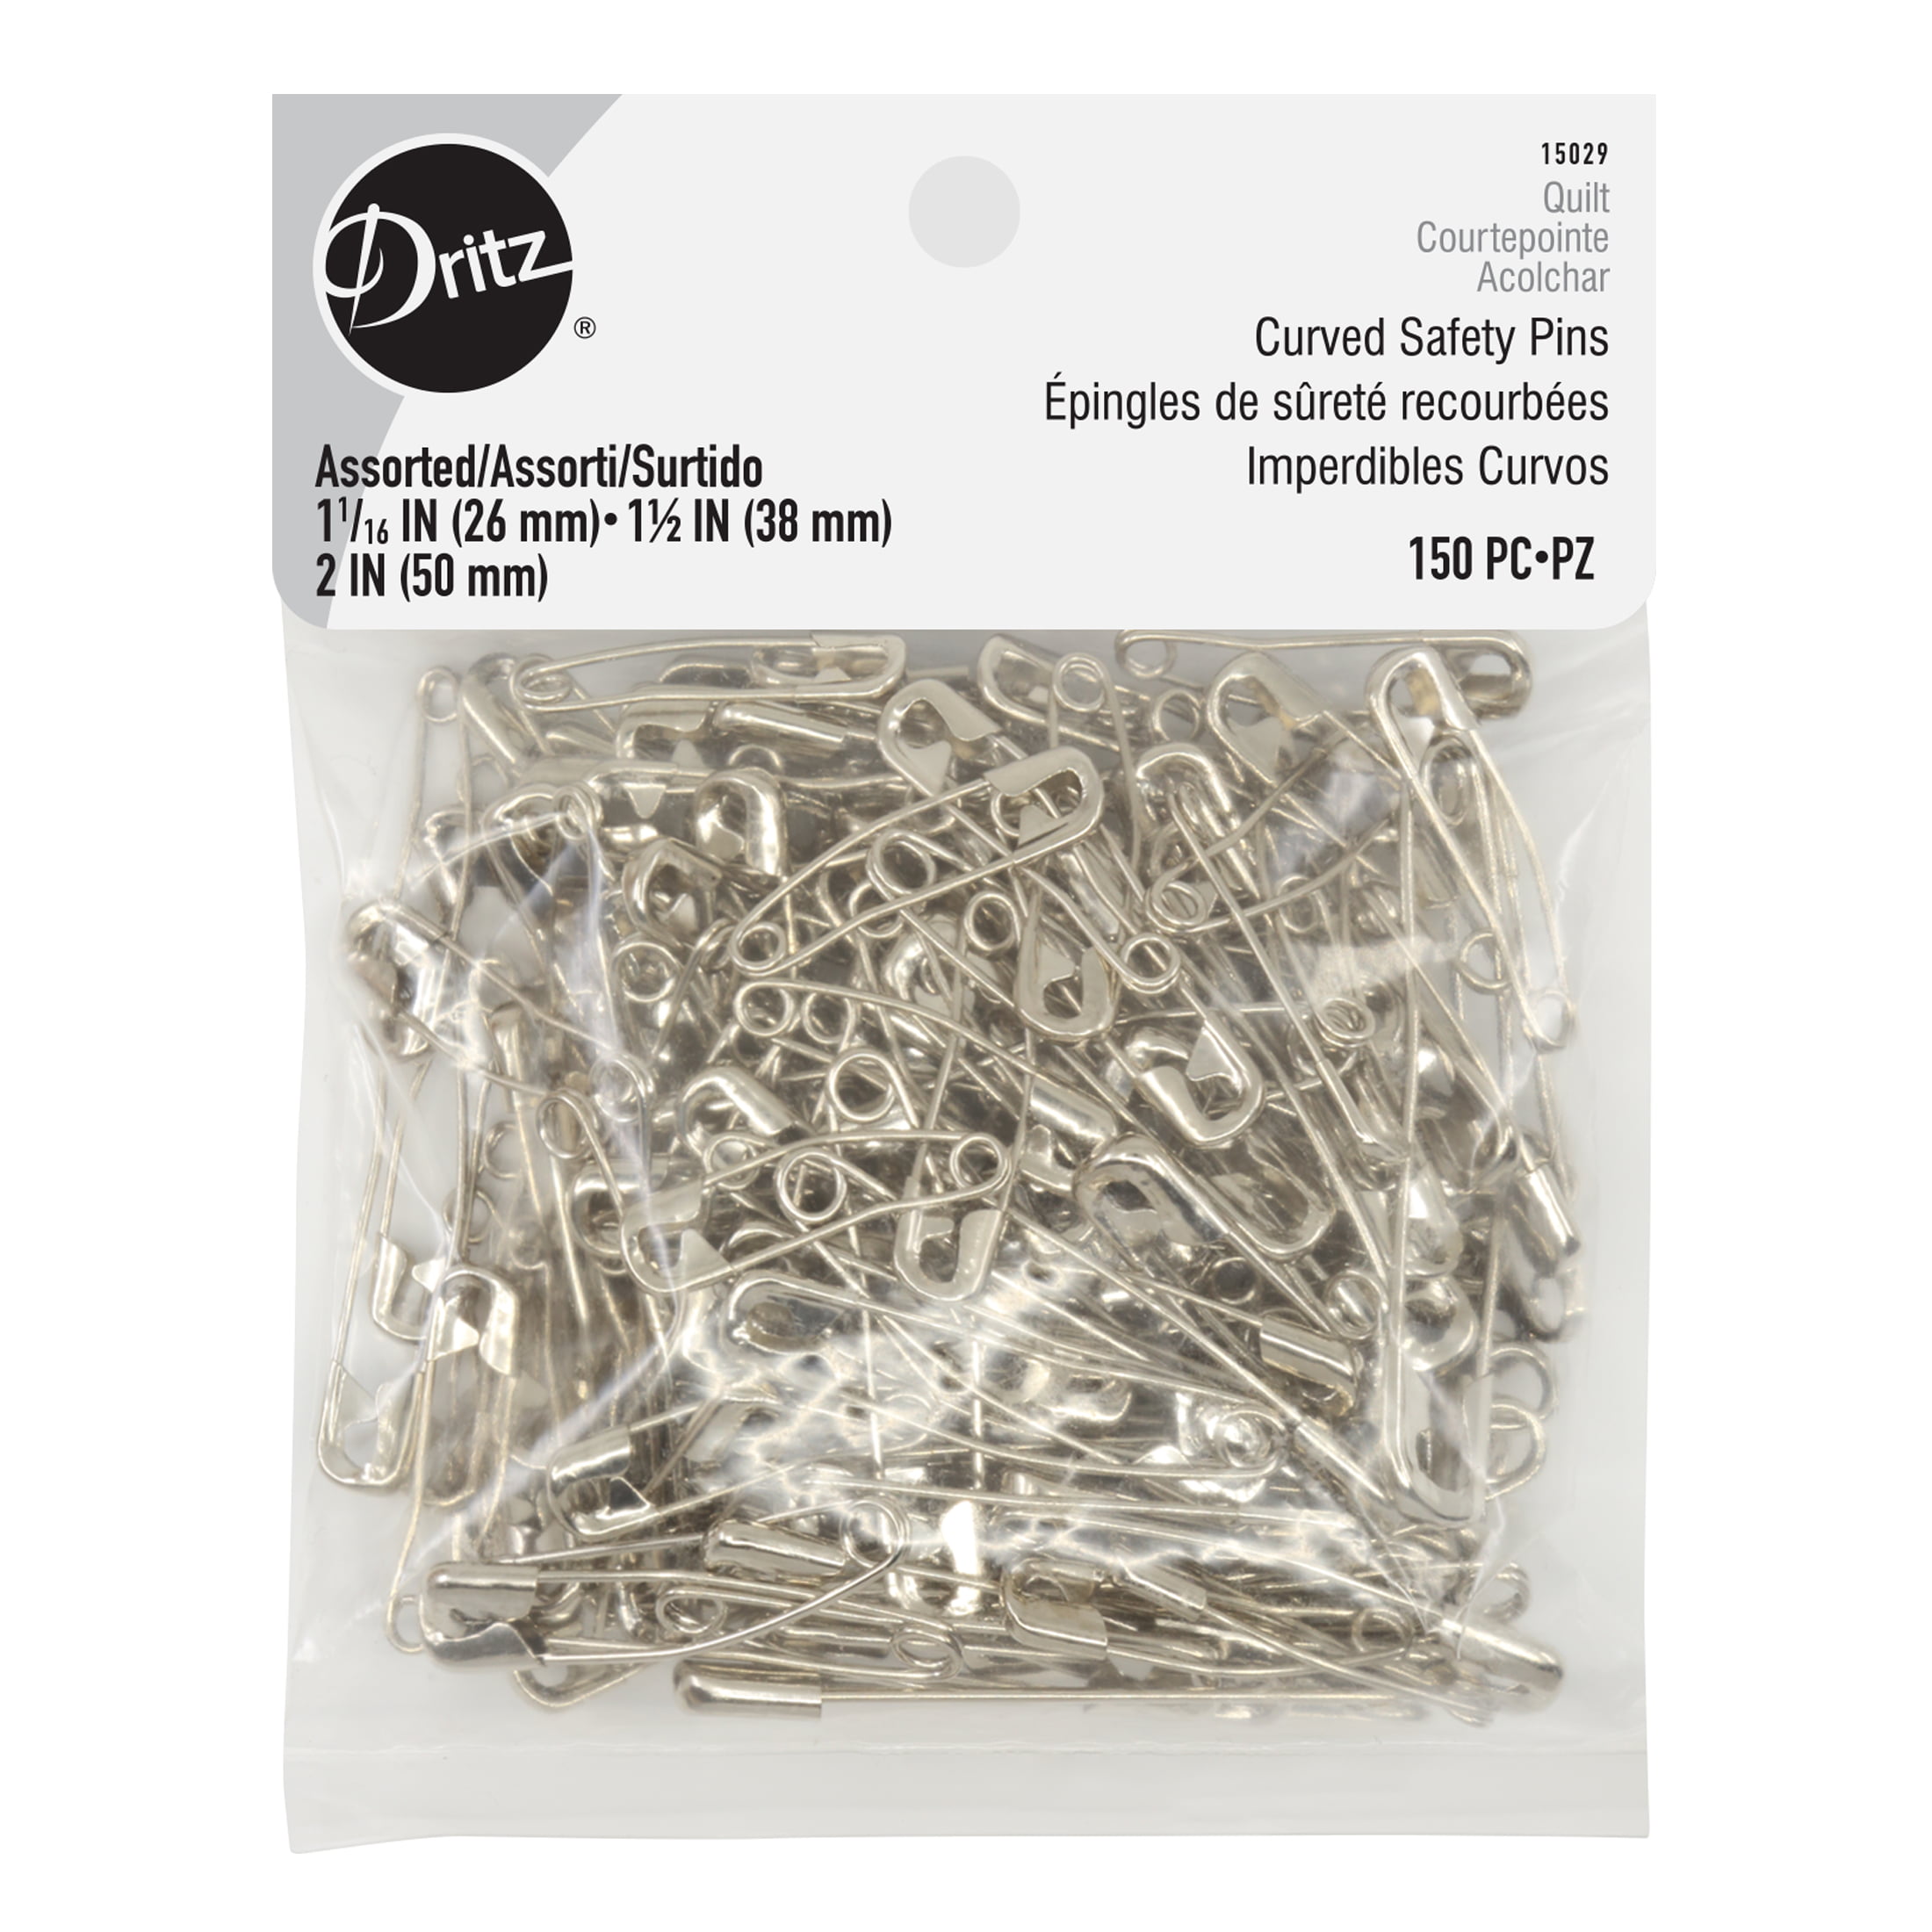 Dritz Diaper Pins with Metal Locking Head- 2 sets (4 Pieces